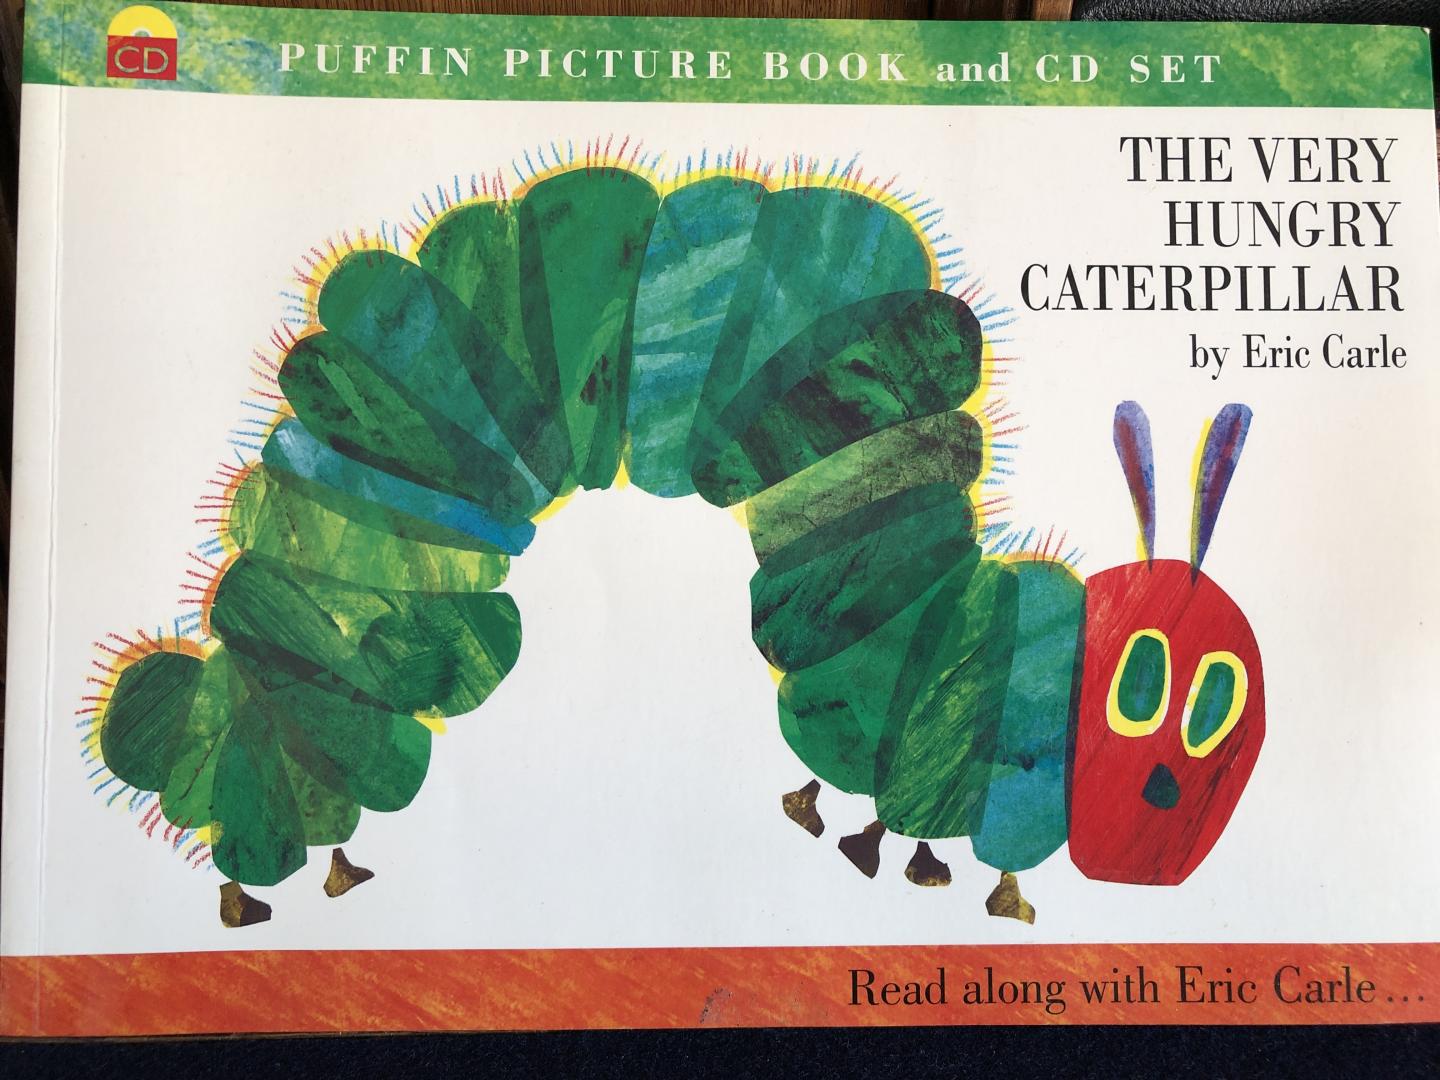 Carle, Eric - The Very Hungry Caterpillar. Book & CD